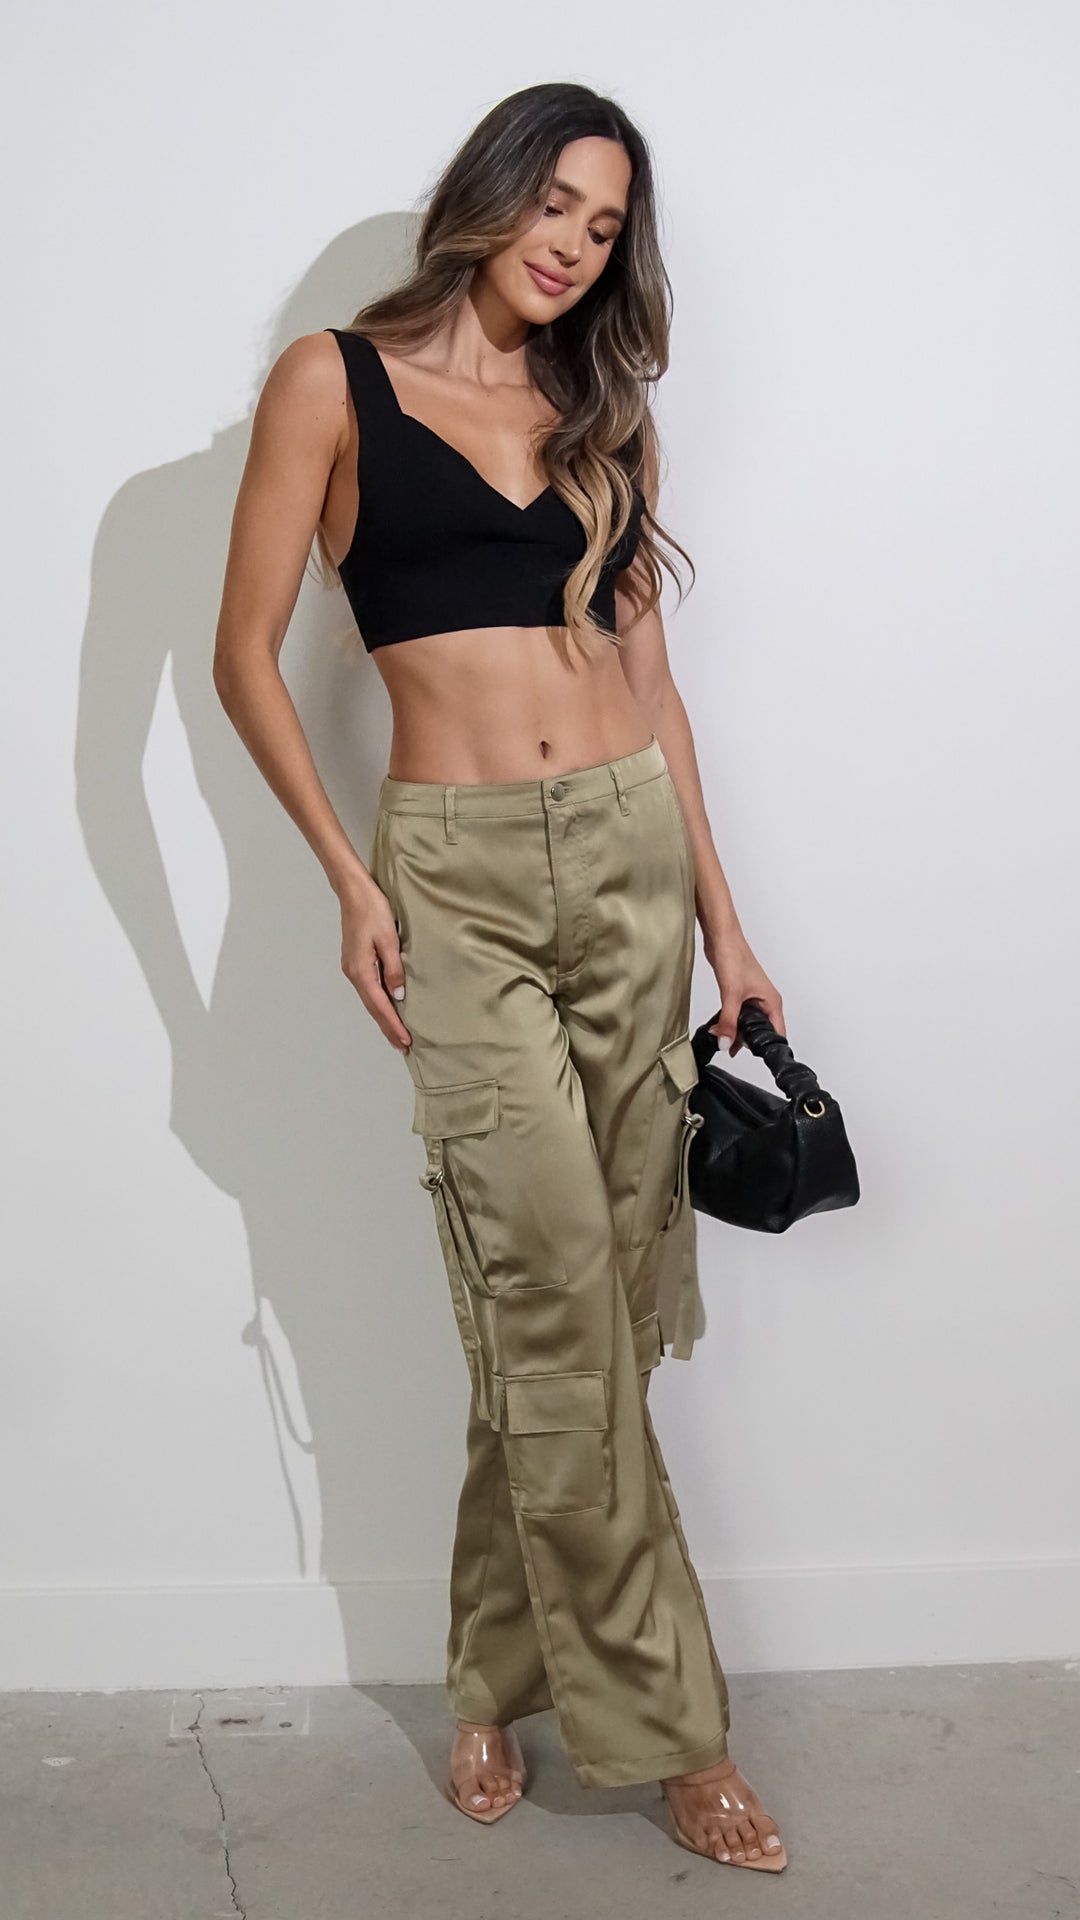 Andi Cargo Pants in Olive